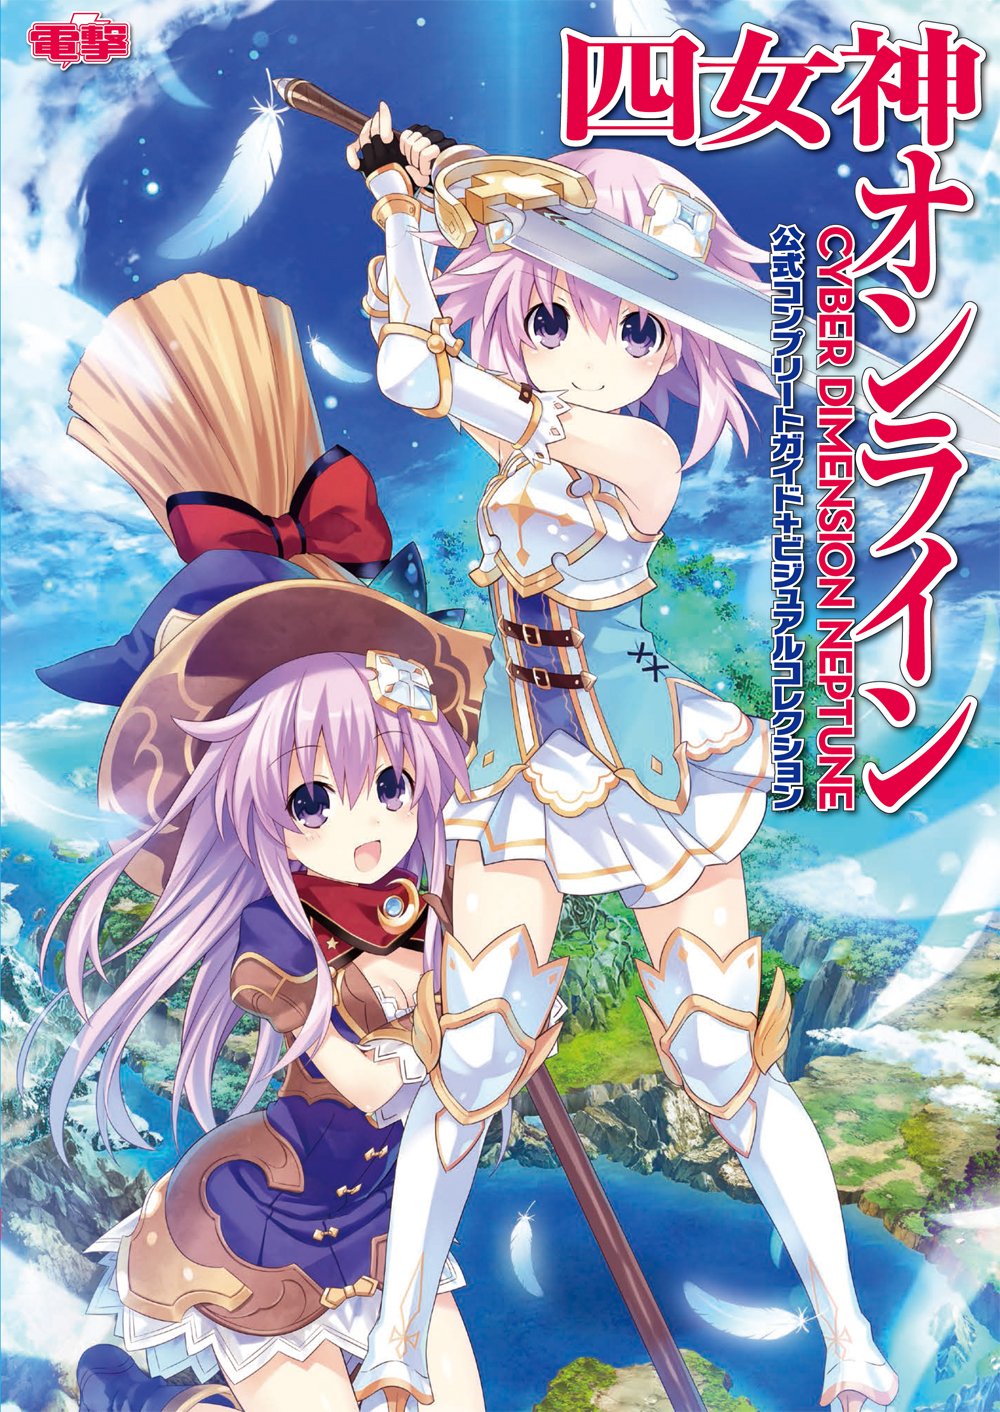 2girls armor armored_boots boots breastplate broom choujigen_game_neptune cover dress elbow_gloves eyebrows_visible_through_hair feathers female fingerless_gloves four_goddesses_online:_cyber_dimension_neptune gauntlets gloves hair_ornament hat highres holding holding_weapon knee_boots kneeling long_hair looking_at_viewer multiple_girls nepgear neptune_(choujigen_game_neptune) neptune_(series) official_art open_mouth purple_hair short_dress short_hair short_sleeves siblings skirt sleeveless smile sword thigh-highs tsunako violet_eyes weapon witch_hat zettai_ryouiki